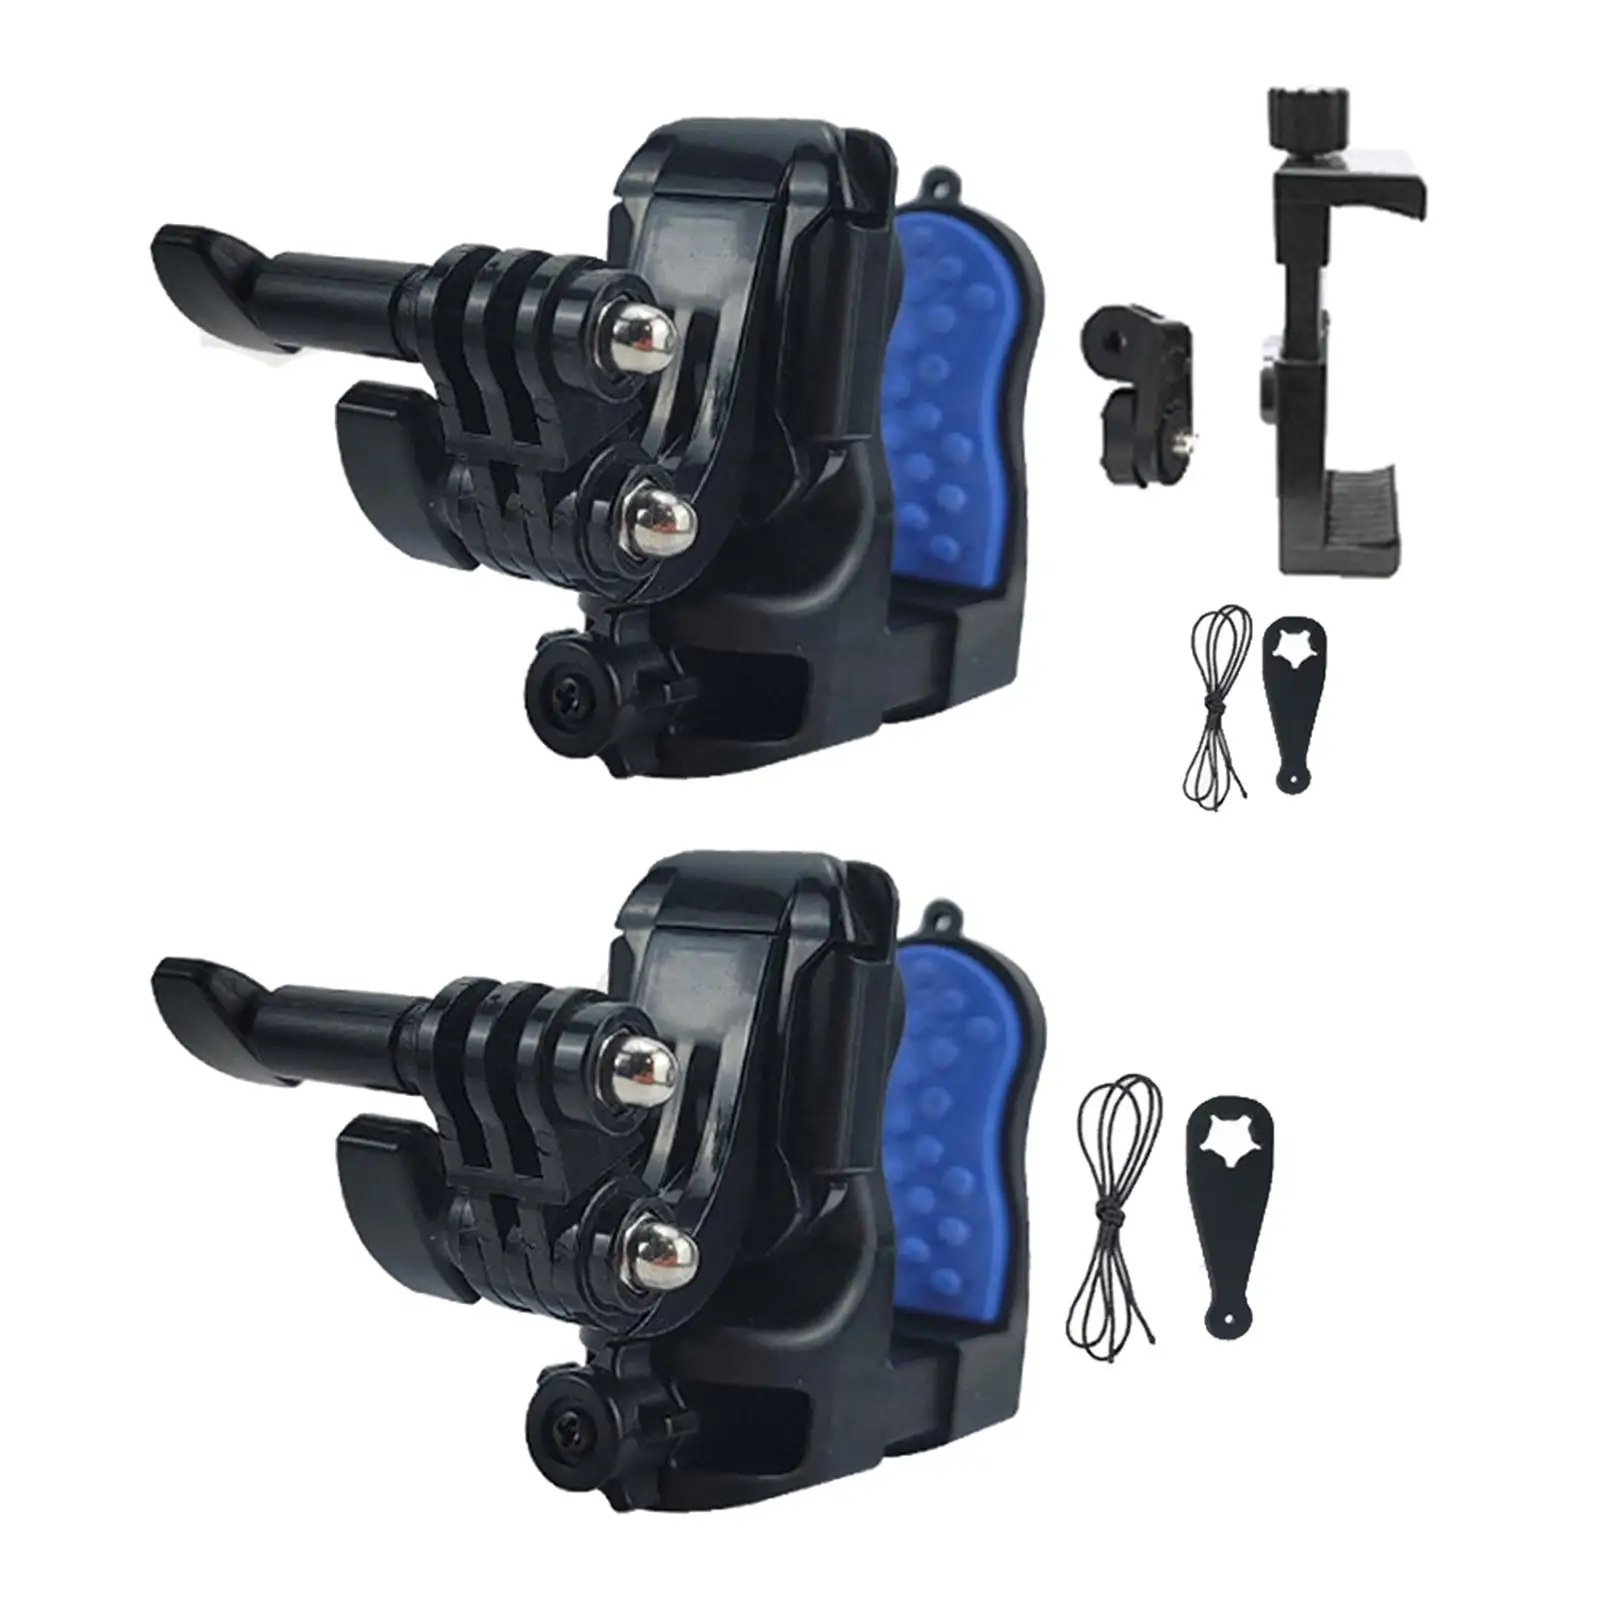 Motorcycle Helmet Chin Mount Rubber pad clips on Style High performance Portable Stable for Action Camera